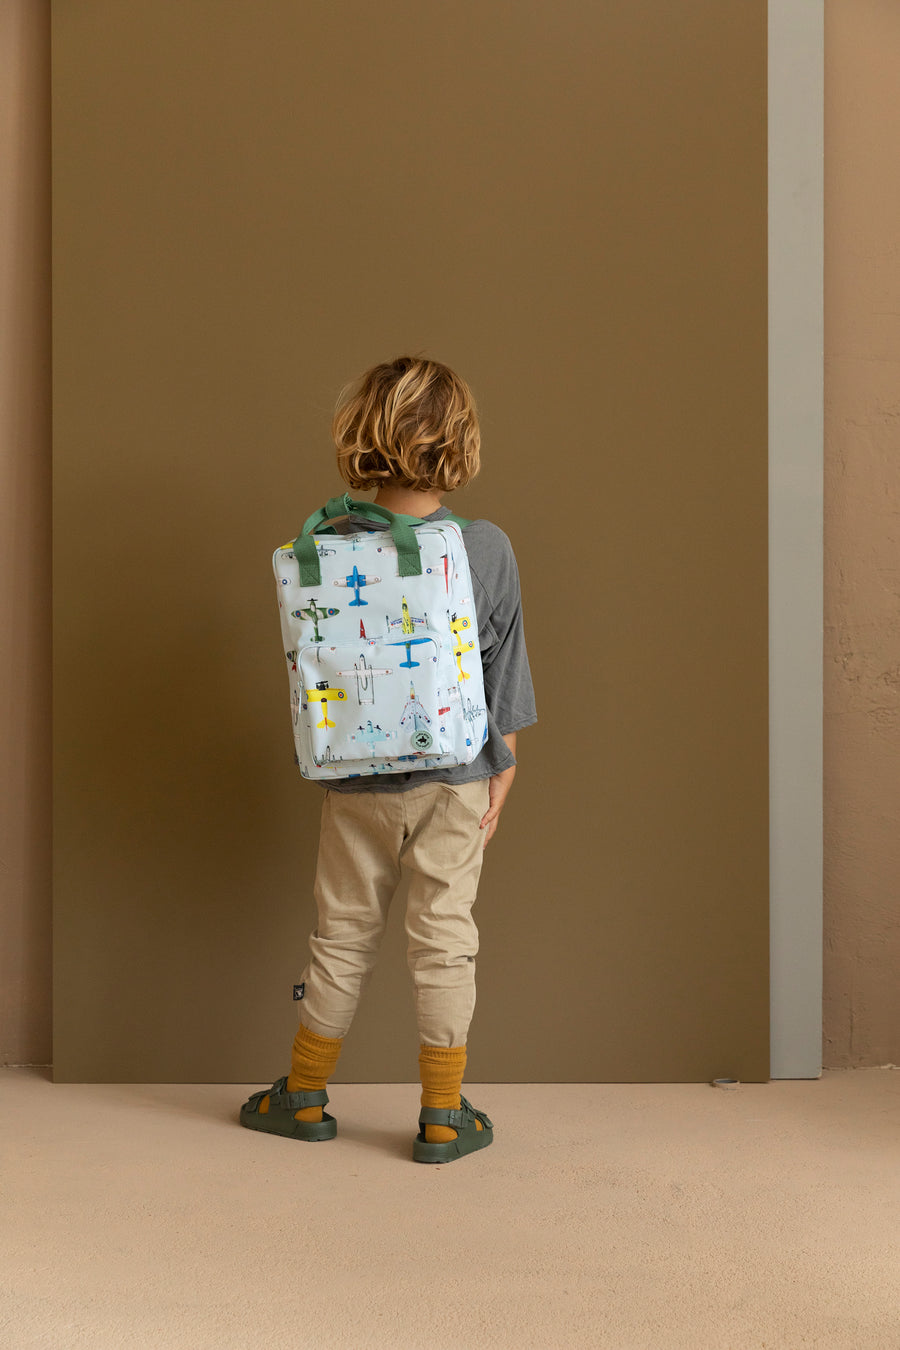 Studio Ditte Large Backpack Ice Blue, Airplanes